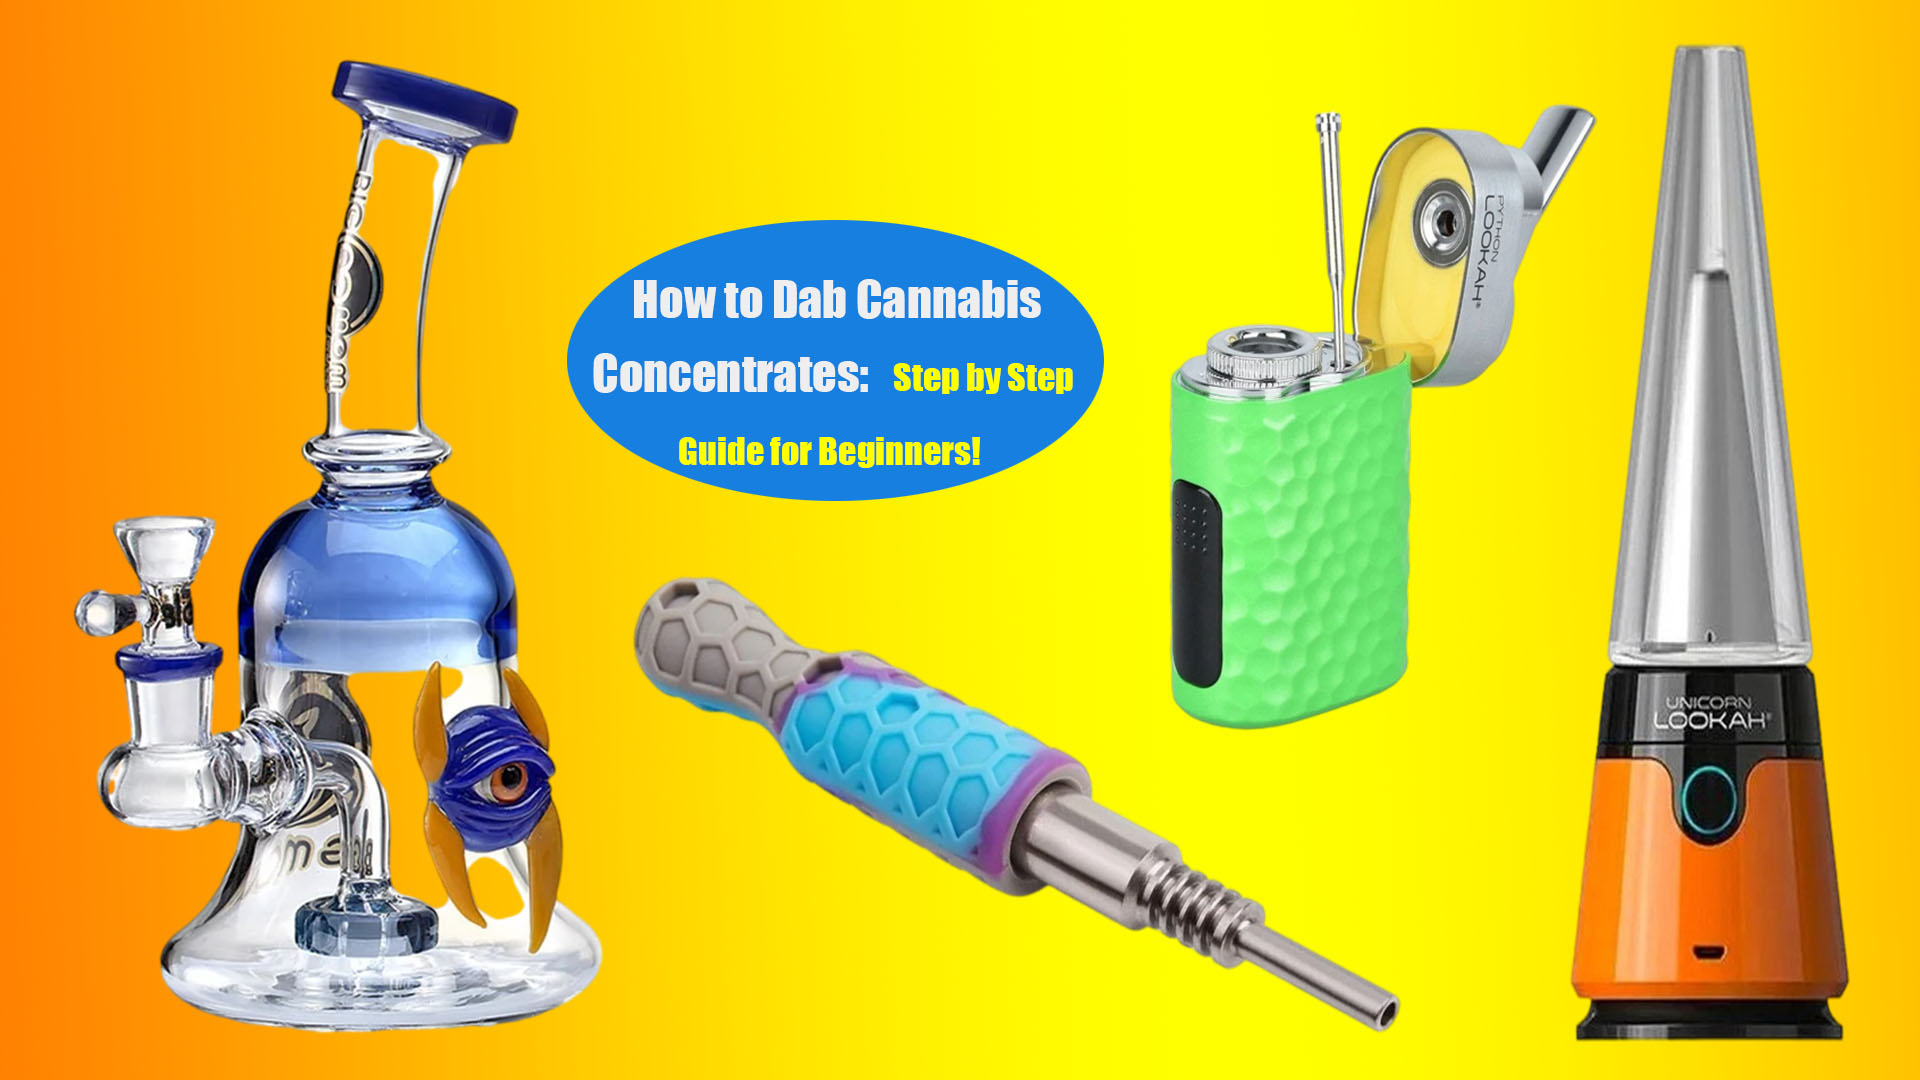 Guide on How to dab cannabis concentrates